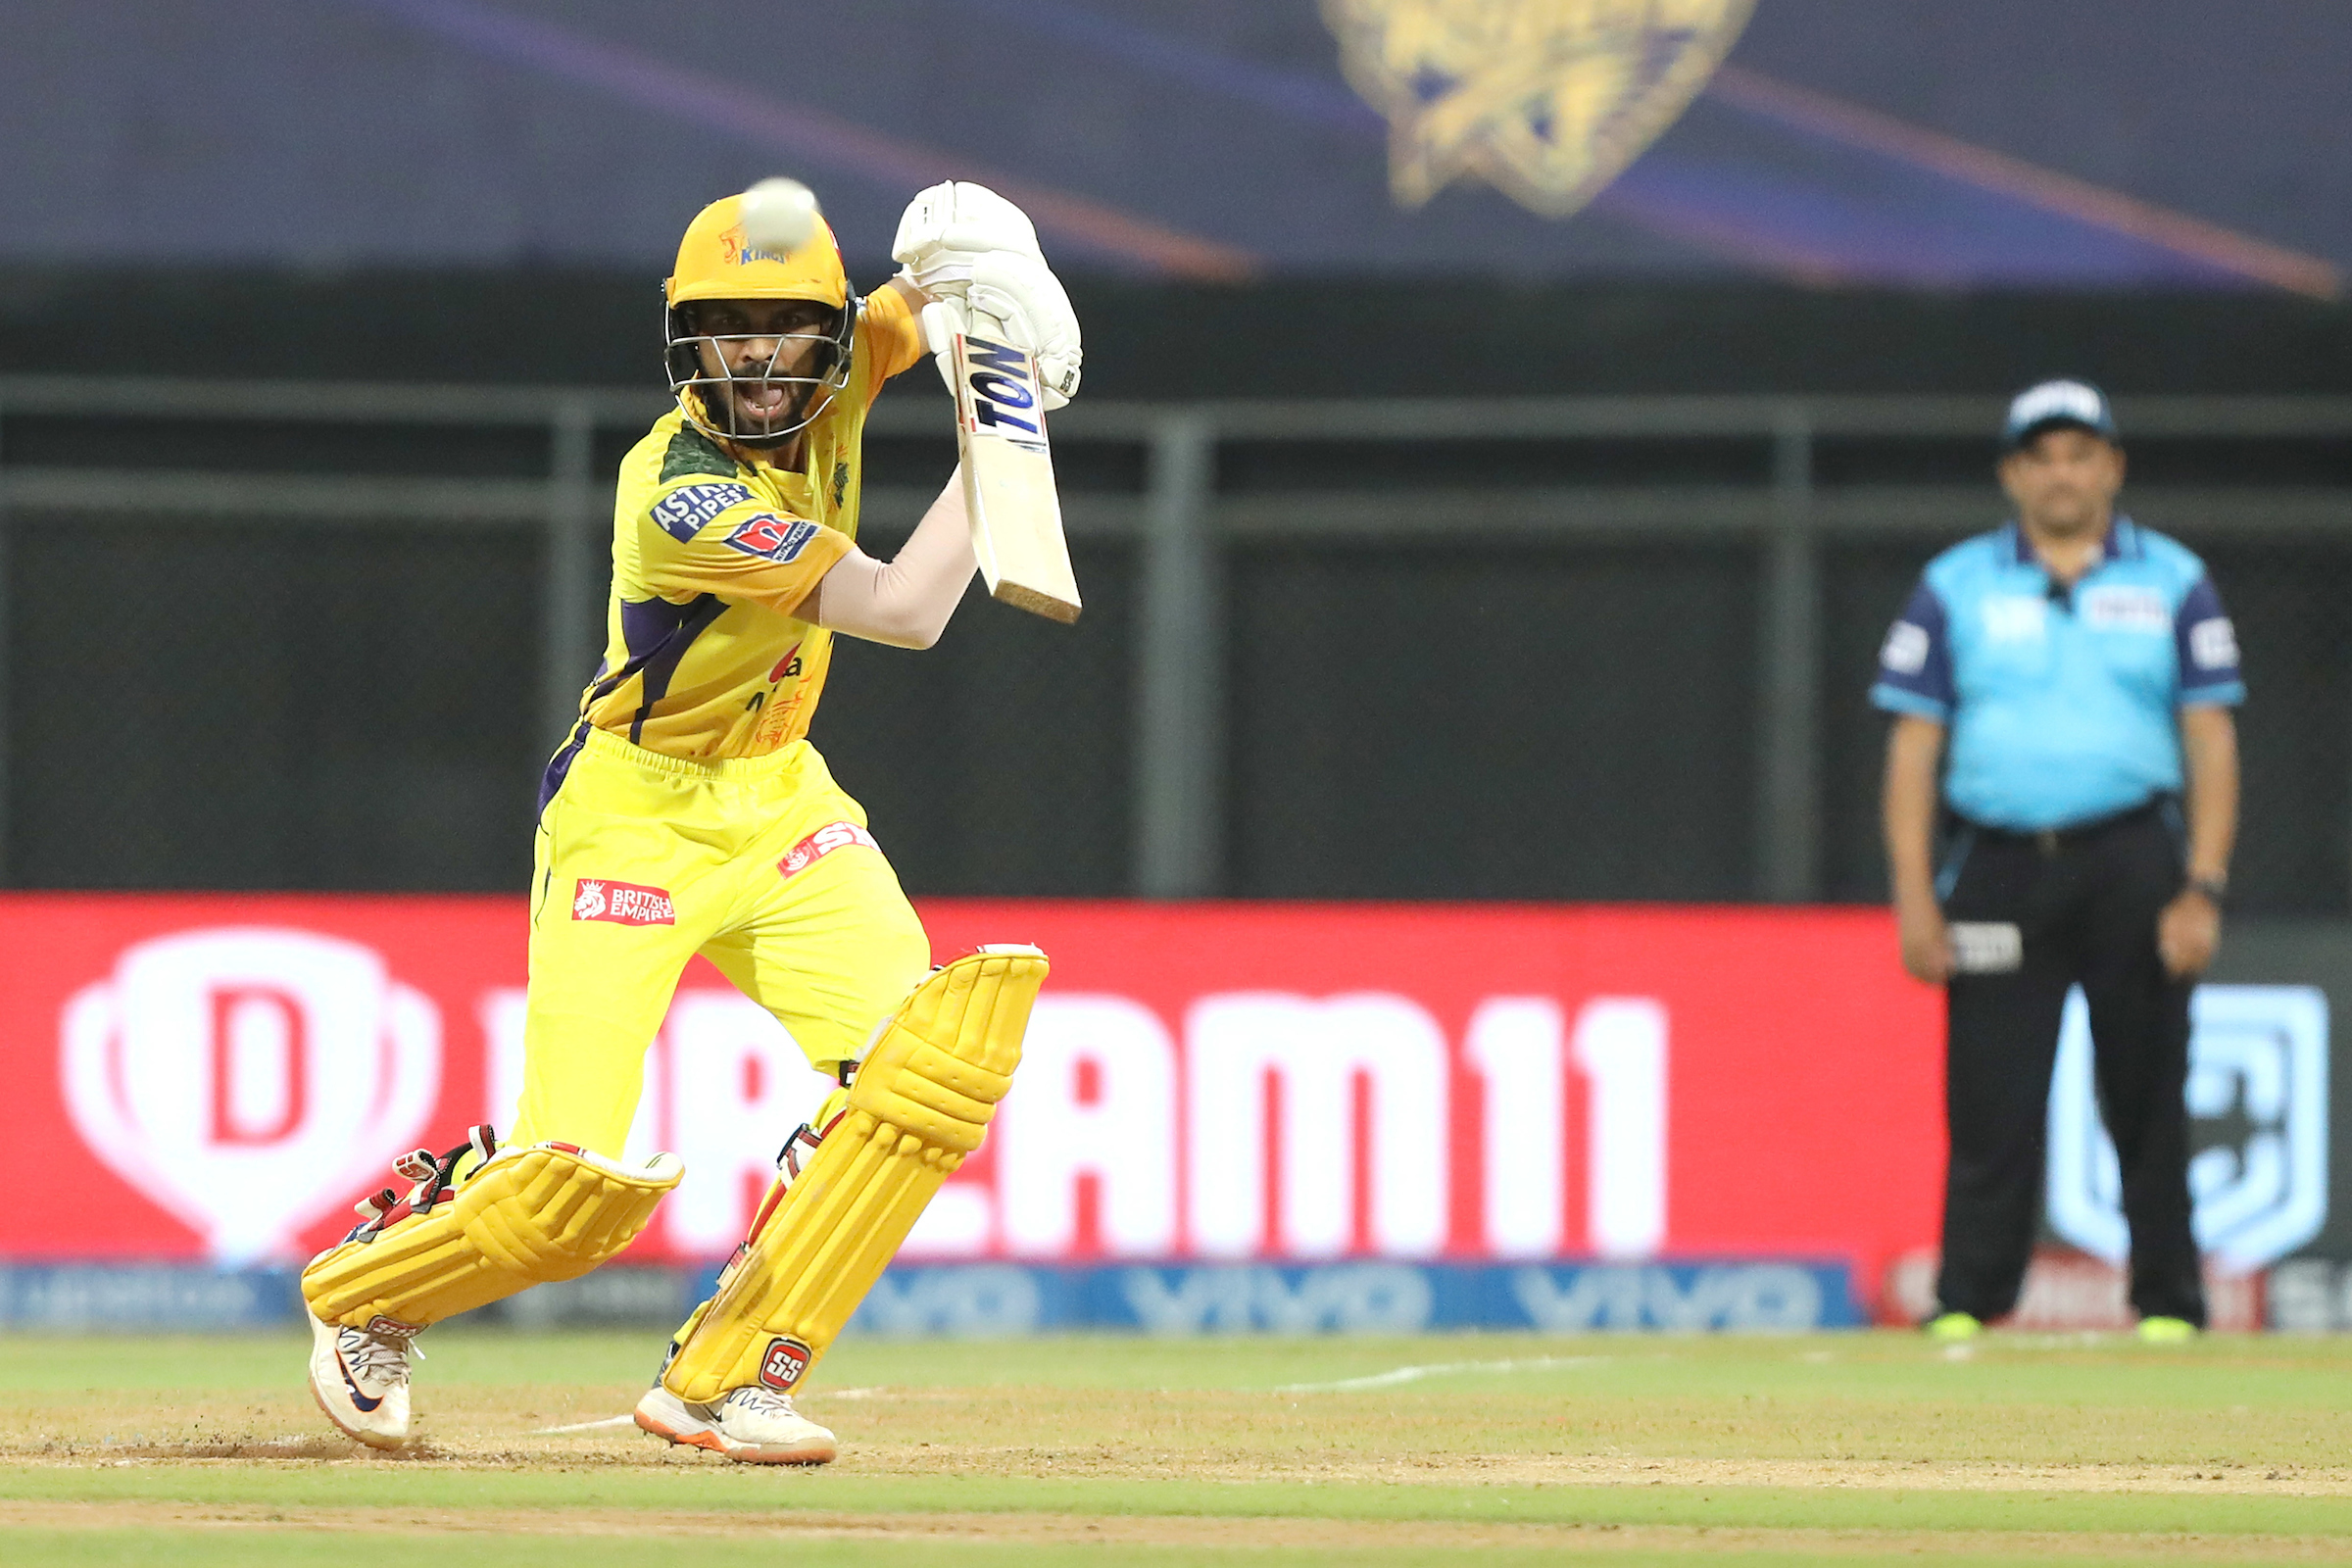 IPL 2021: Twitter Erupts As Chennai Super Kings Overcome Whirlwind Assaults by Andre Russell And Pat Cummins To Notch Up Their 3rd Consecutive Win